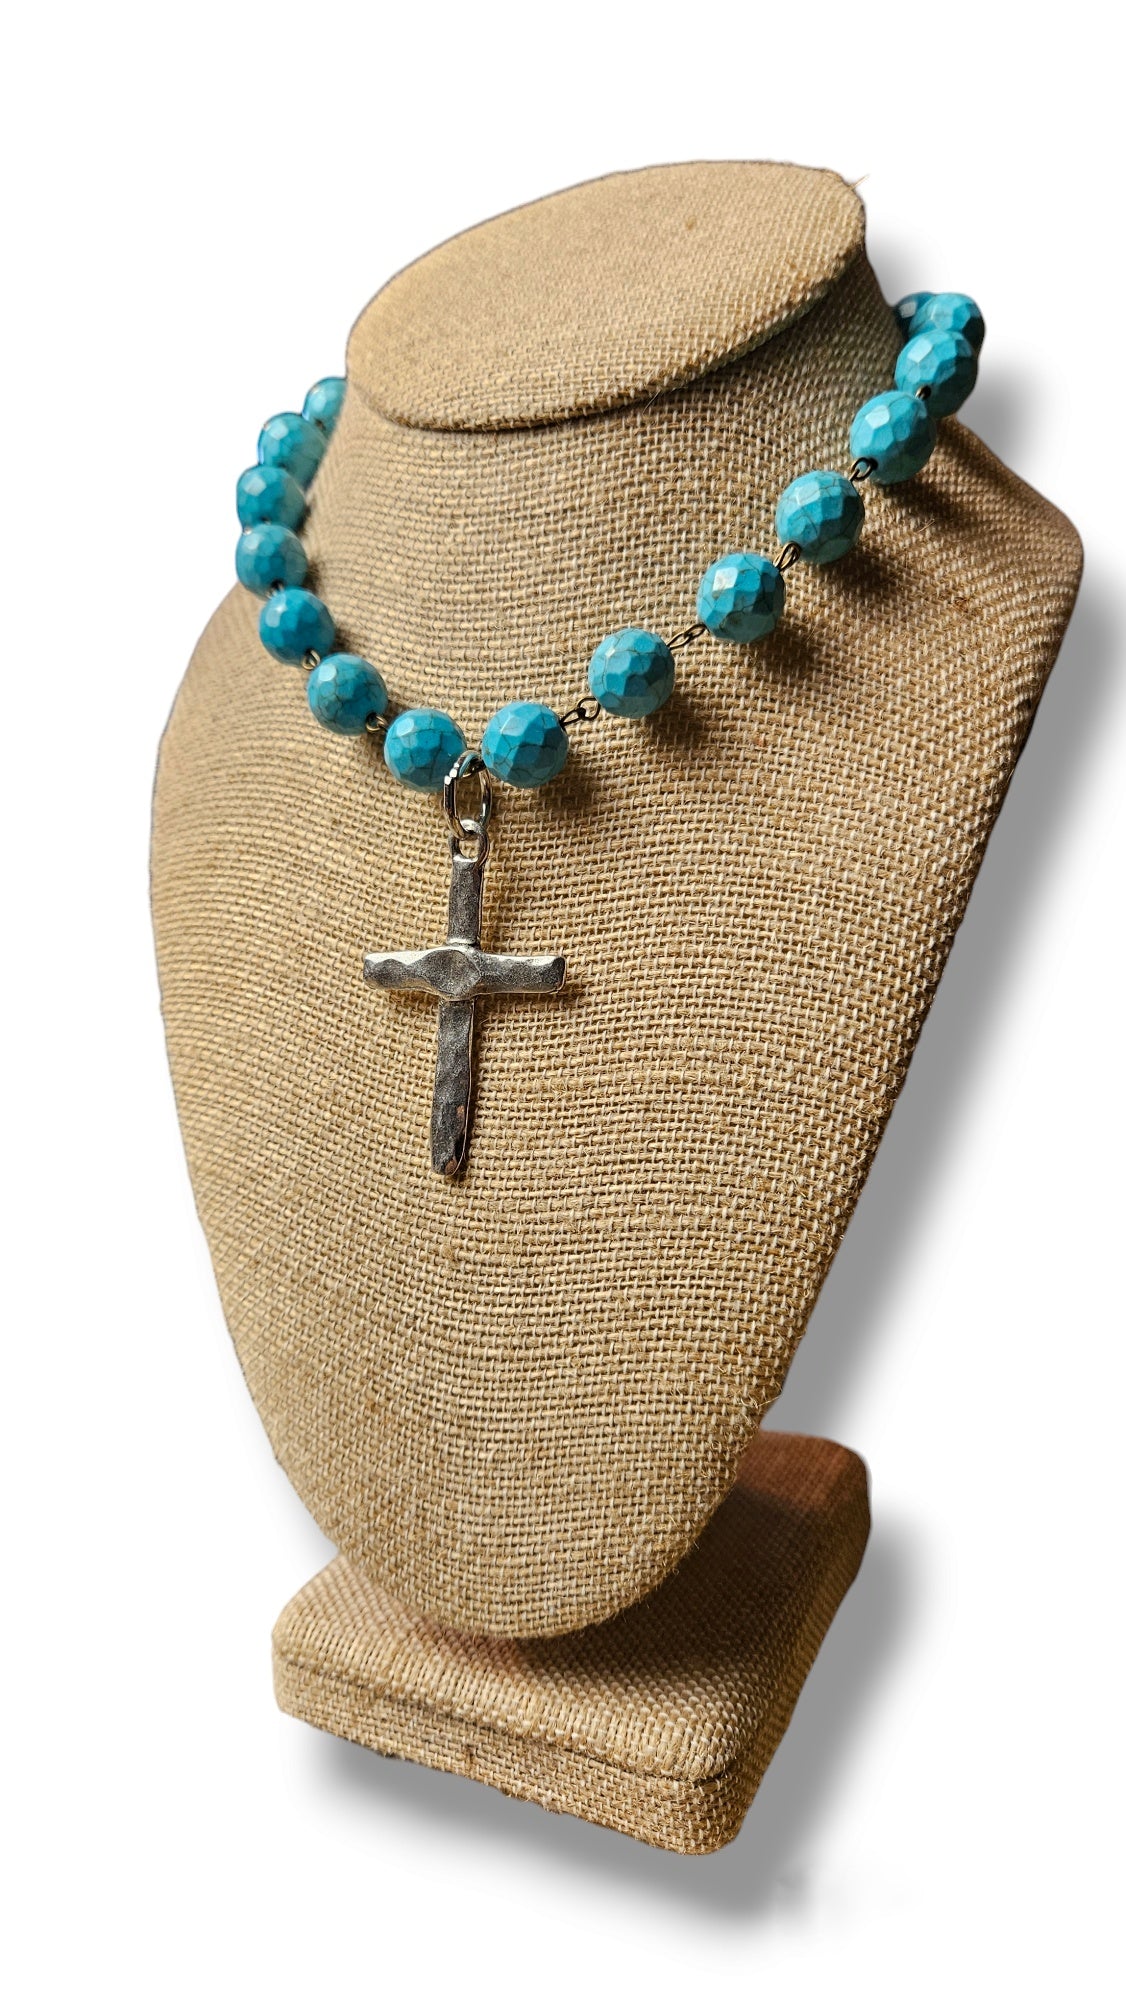 Turquoise cross necklace